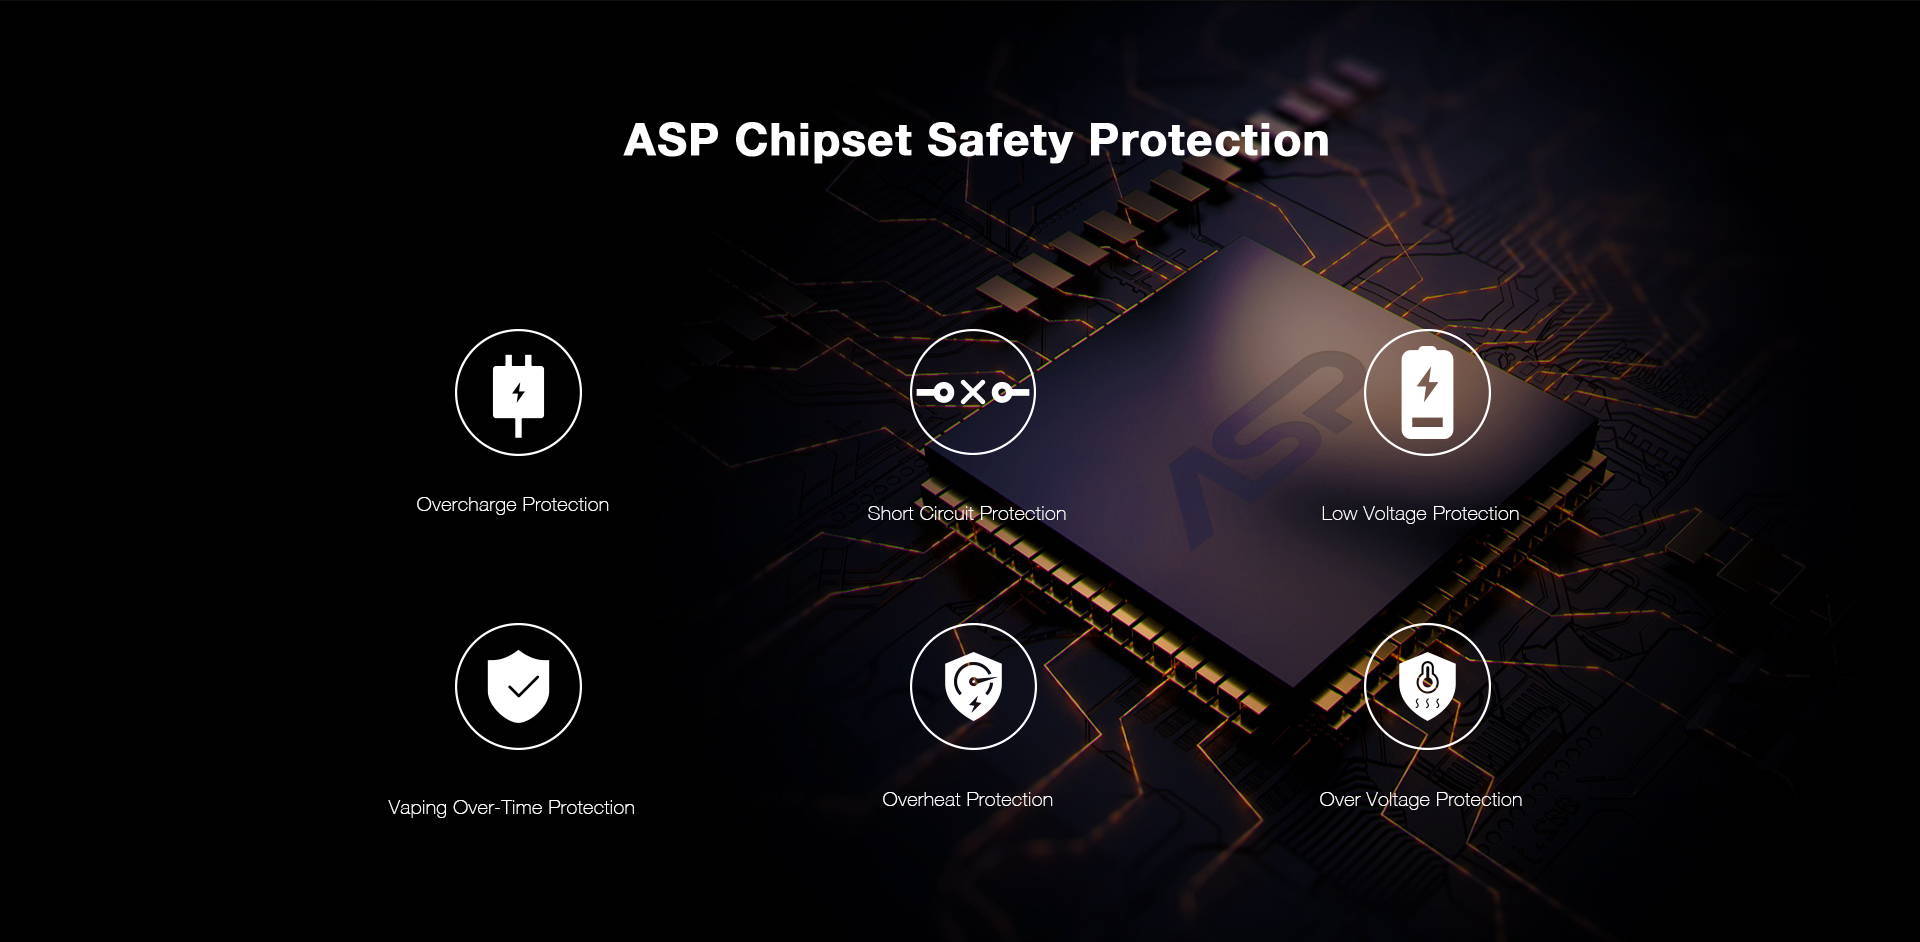 ASP Chipset Safety Protection